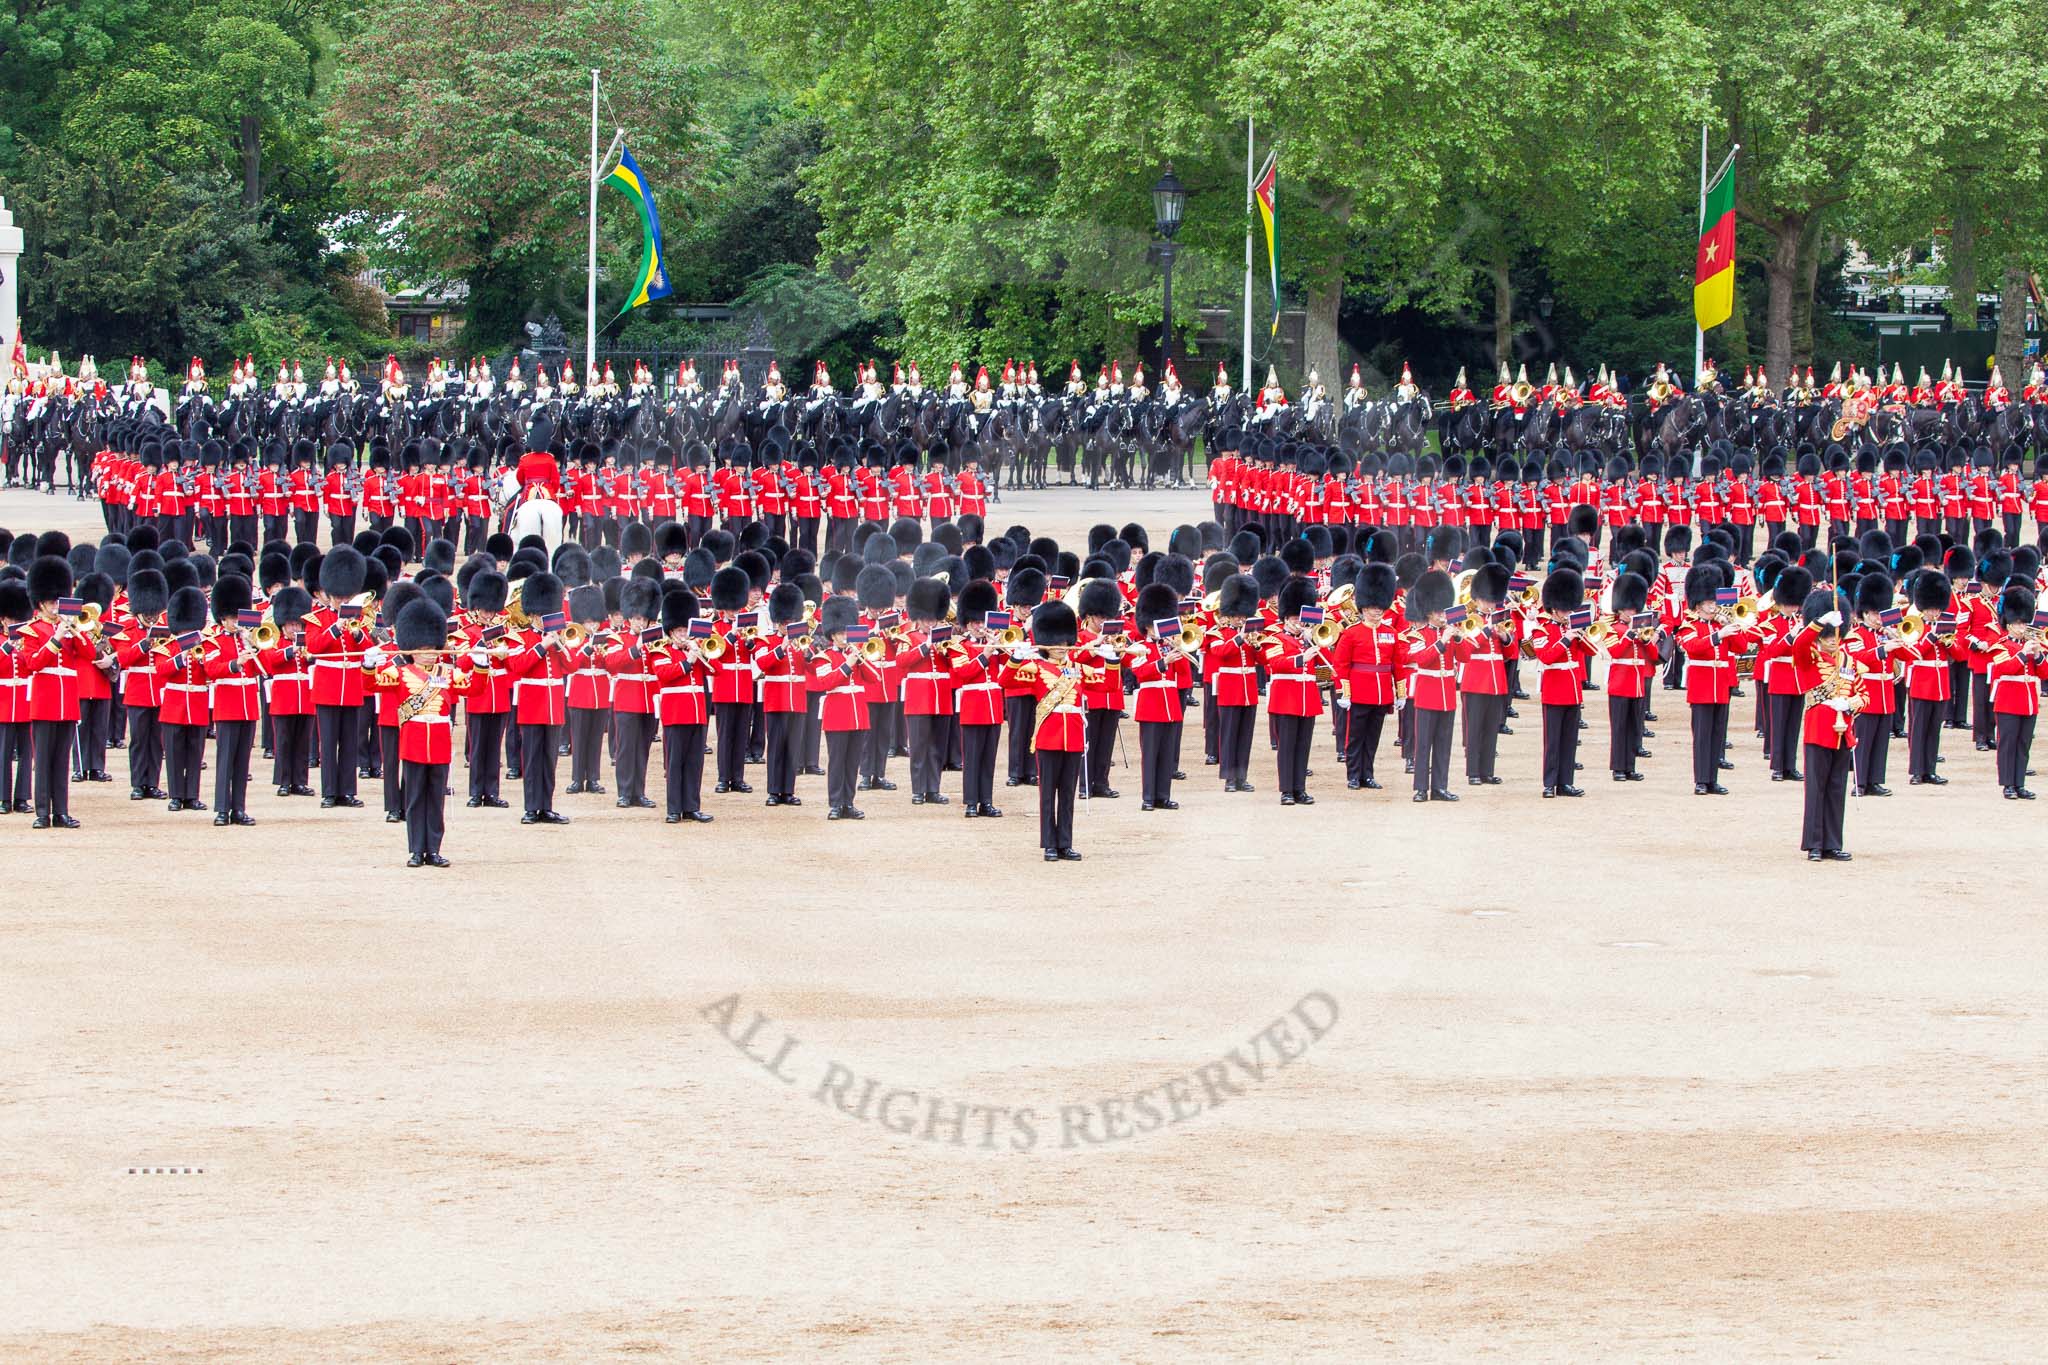 Major General's Review 2013: At the end of the March Past in Quick Time, all five guards on the northern side of Horse Guards Parade peform a ninety-degree-turn at the same time..
Horse Guards Parade, Westminster,
London SW1,

United Kingdom,
on 01 June 2013 at 11:47, image #559